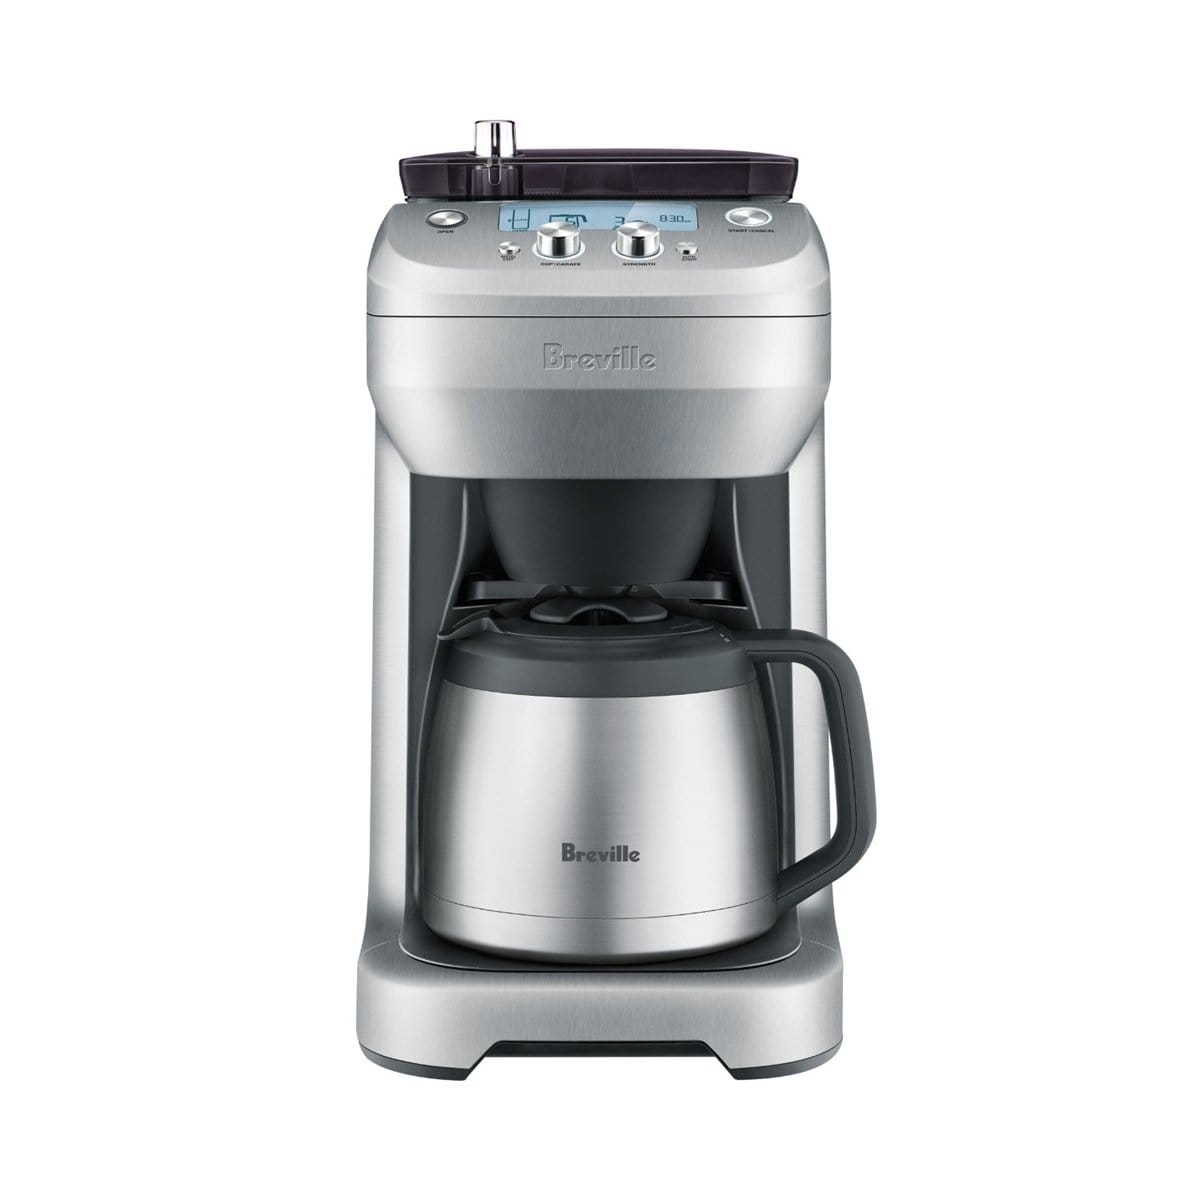 Breville Electric Coffee Maker Breville Grind Control Coffeemaker, Silver